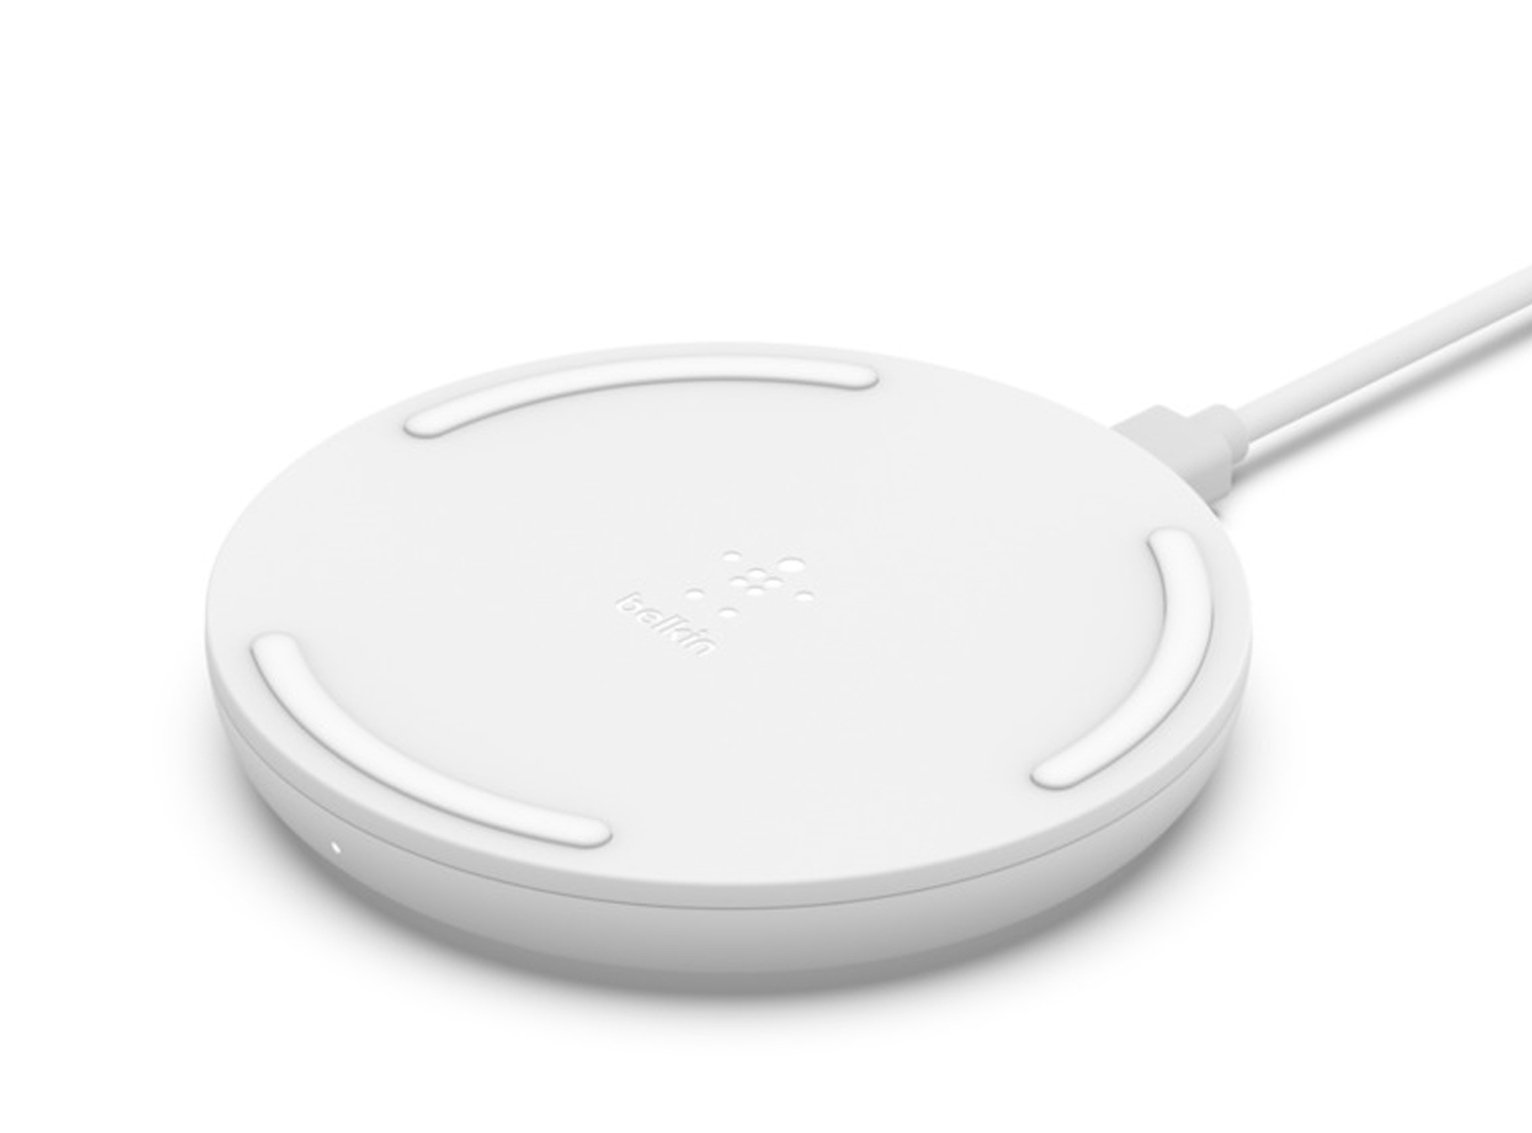 Belkin 15W Qi Wireless Charger Pad Incl. Plug Review